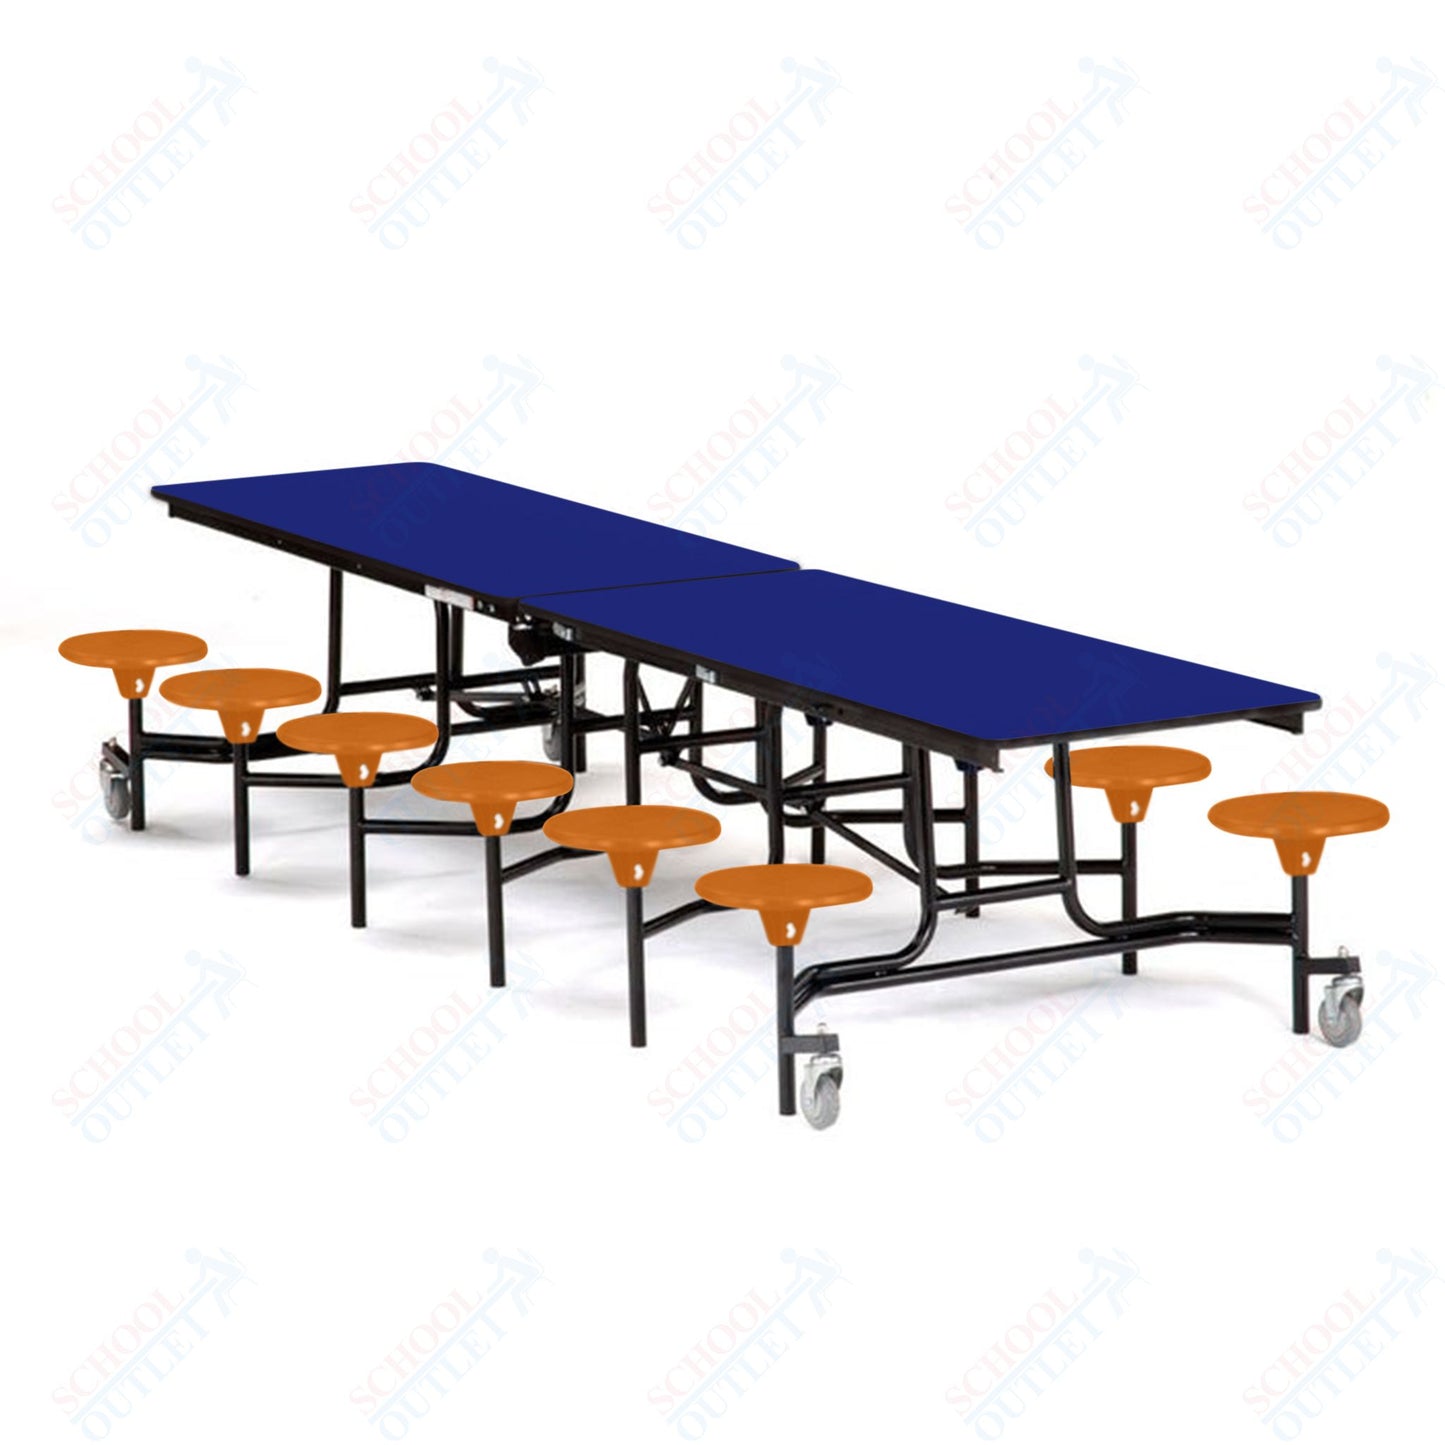 Mobile Cafeteria Lunchroom Stool Table - 30" W x 12' L - 12 Stools - MDF Core - Protect Edge - Black Powdercoated Frame